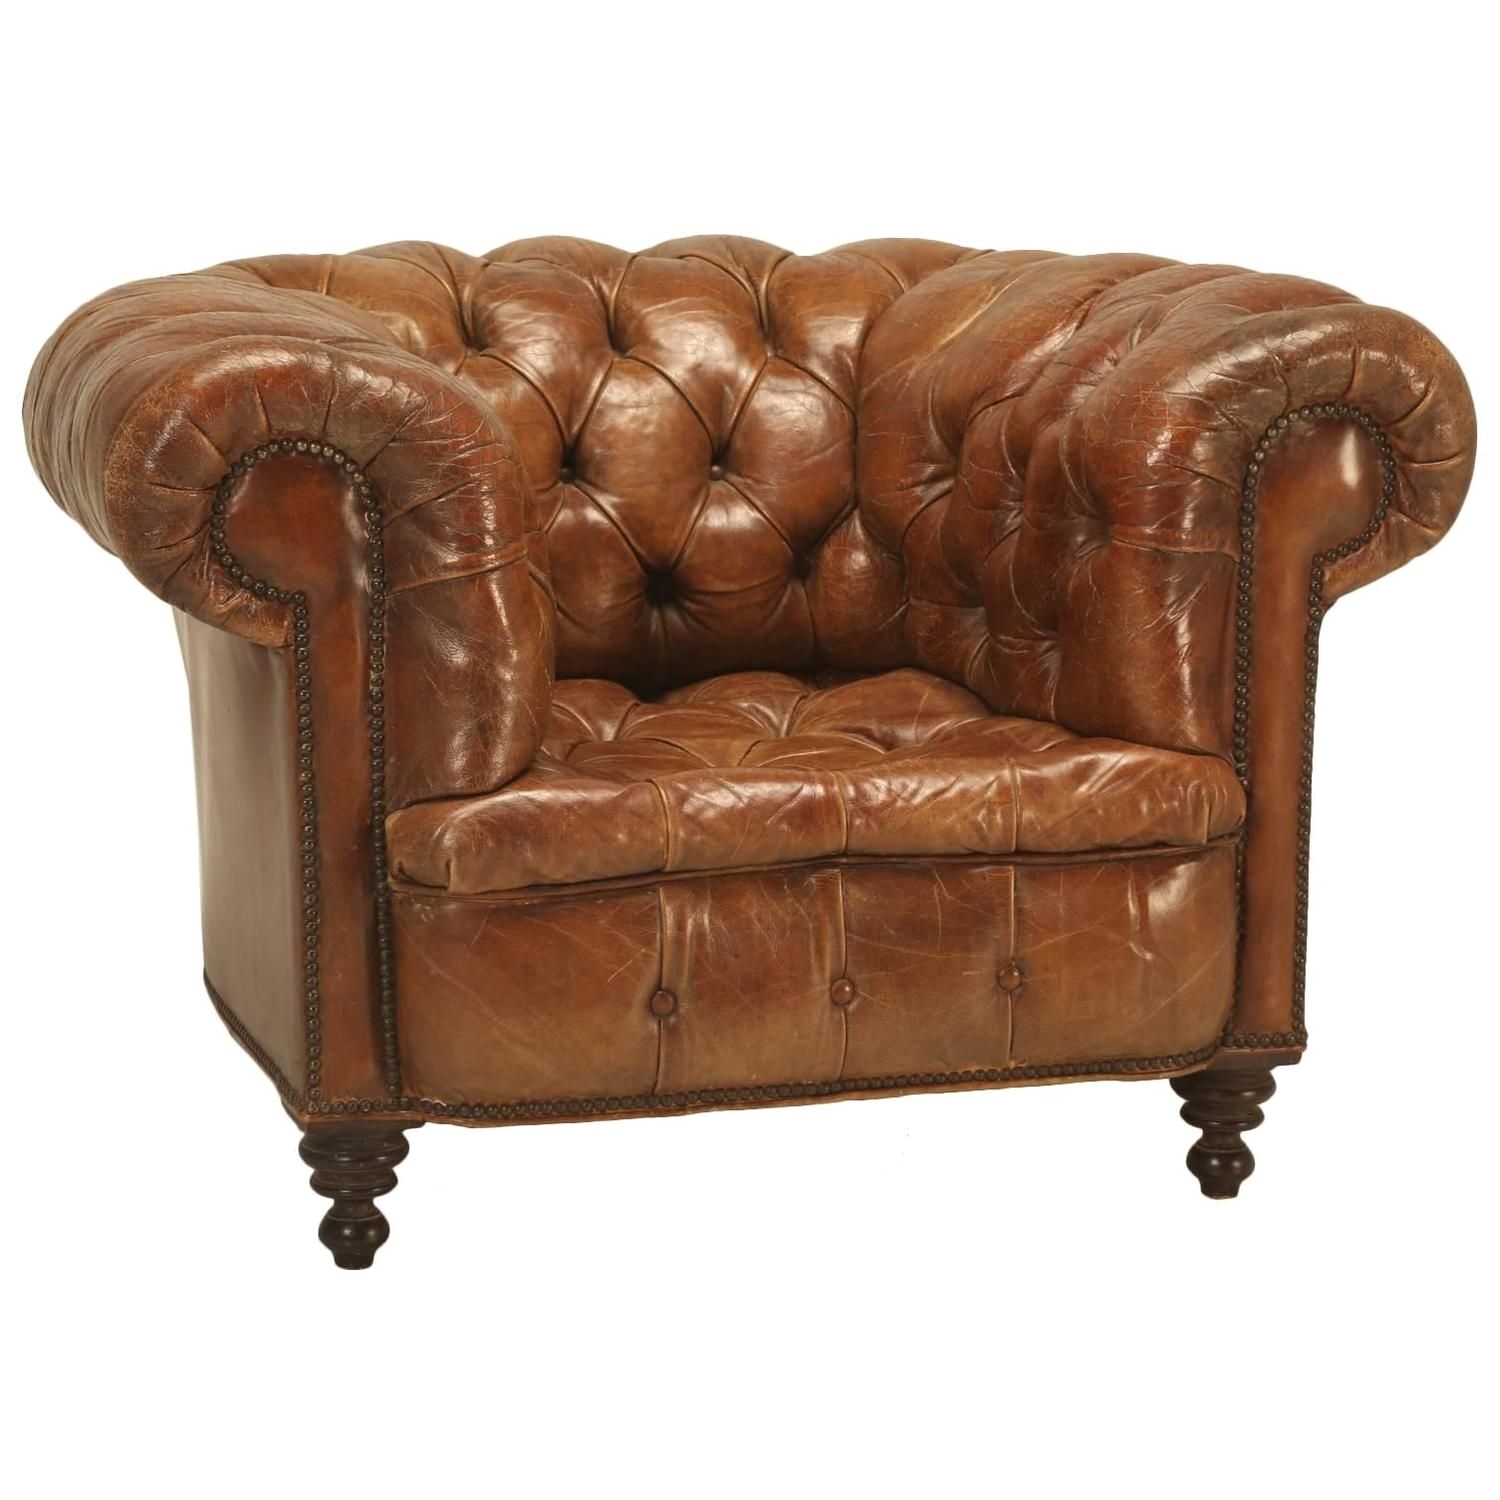 Restoration Hardware Professor Chair Review Antique Chesterfield Chair In original Leather Pinterest